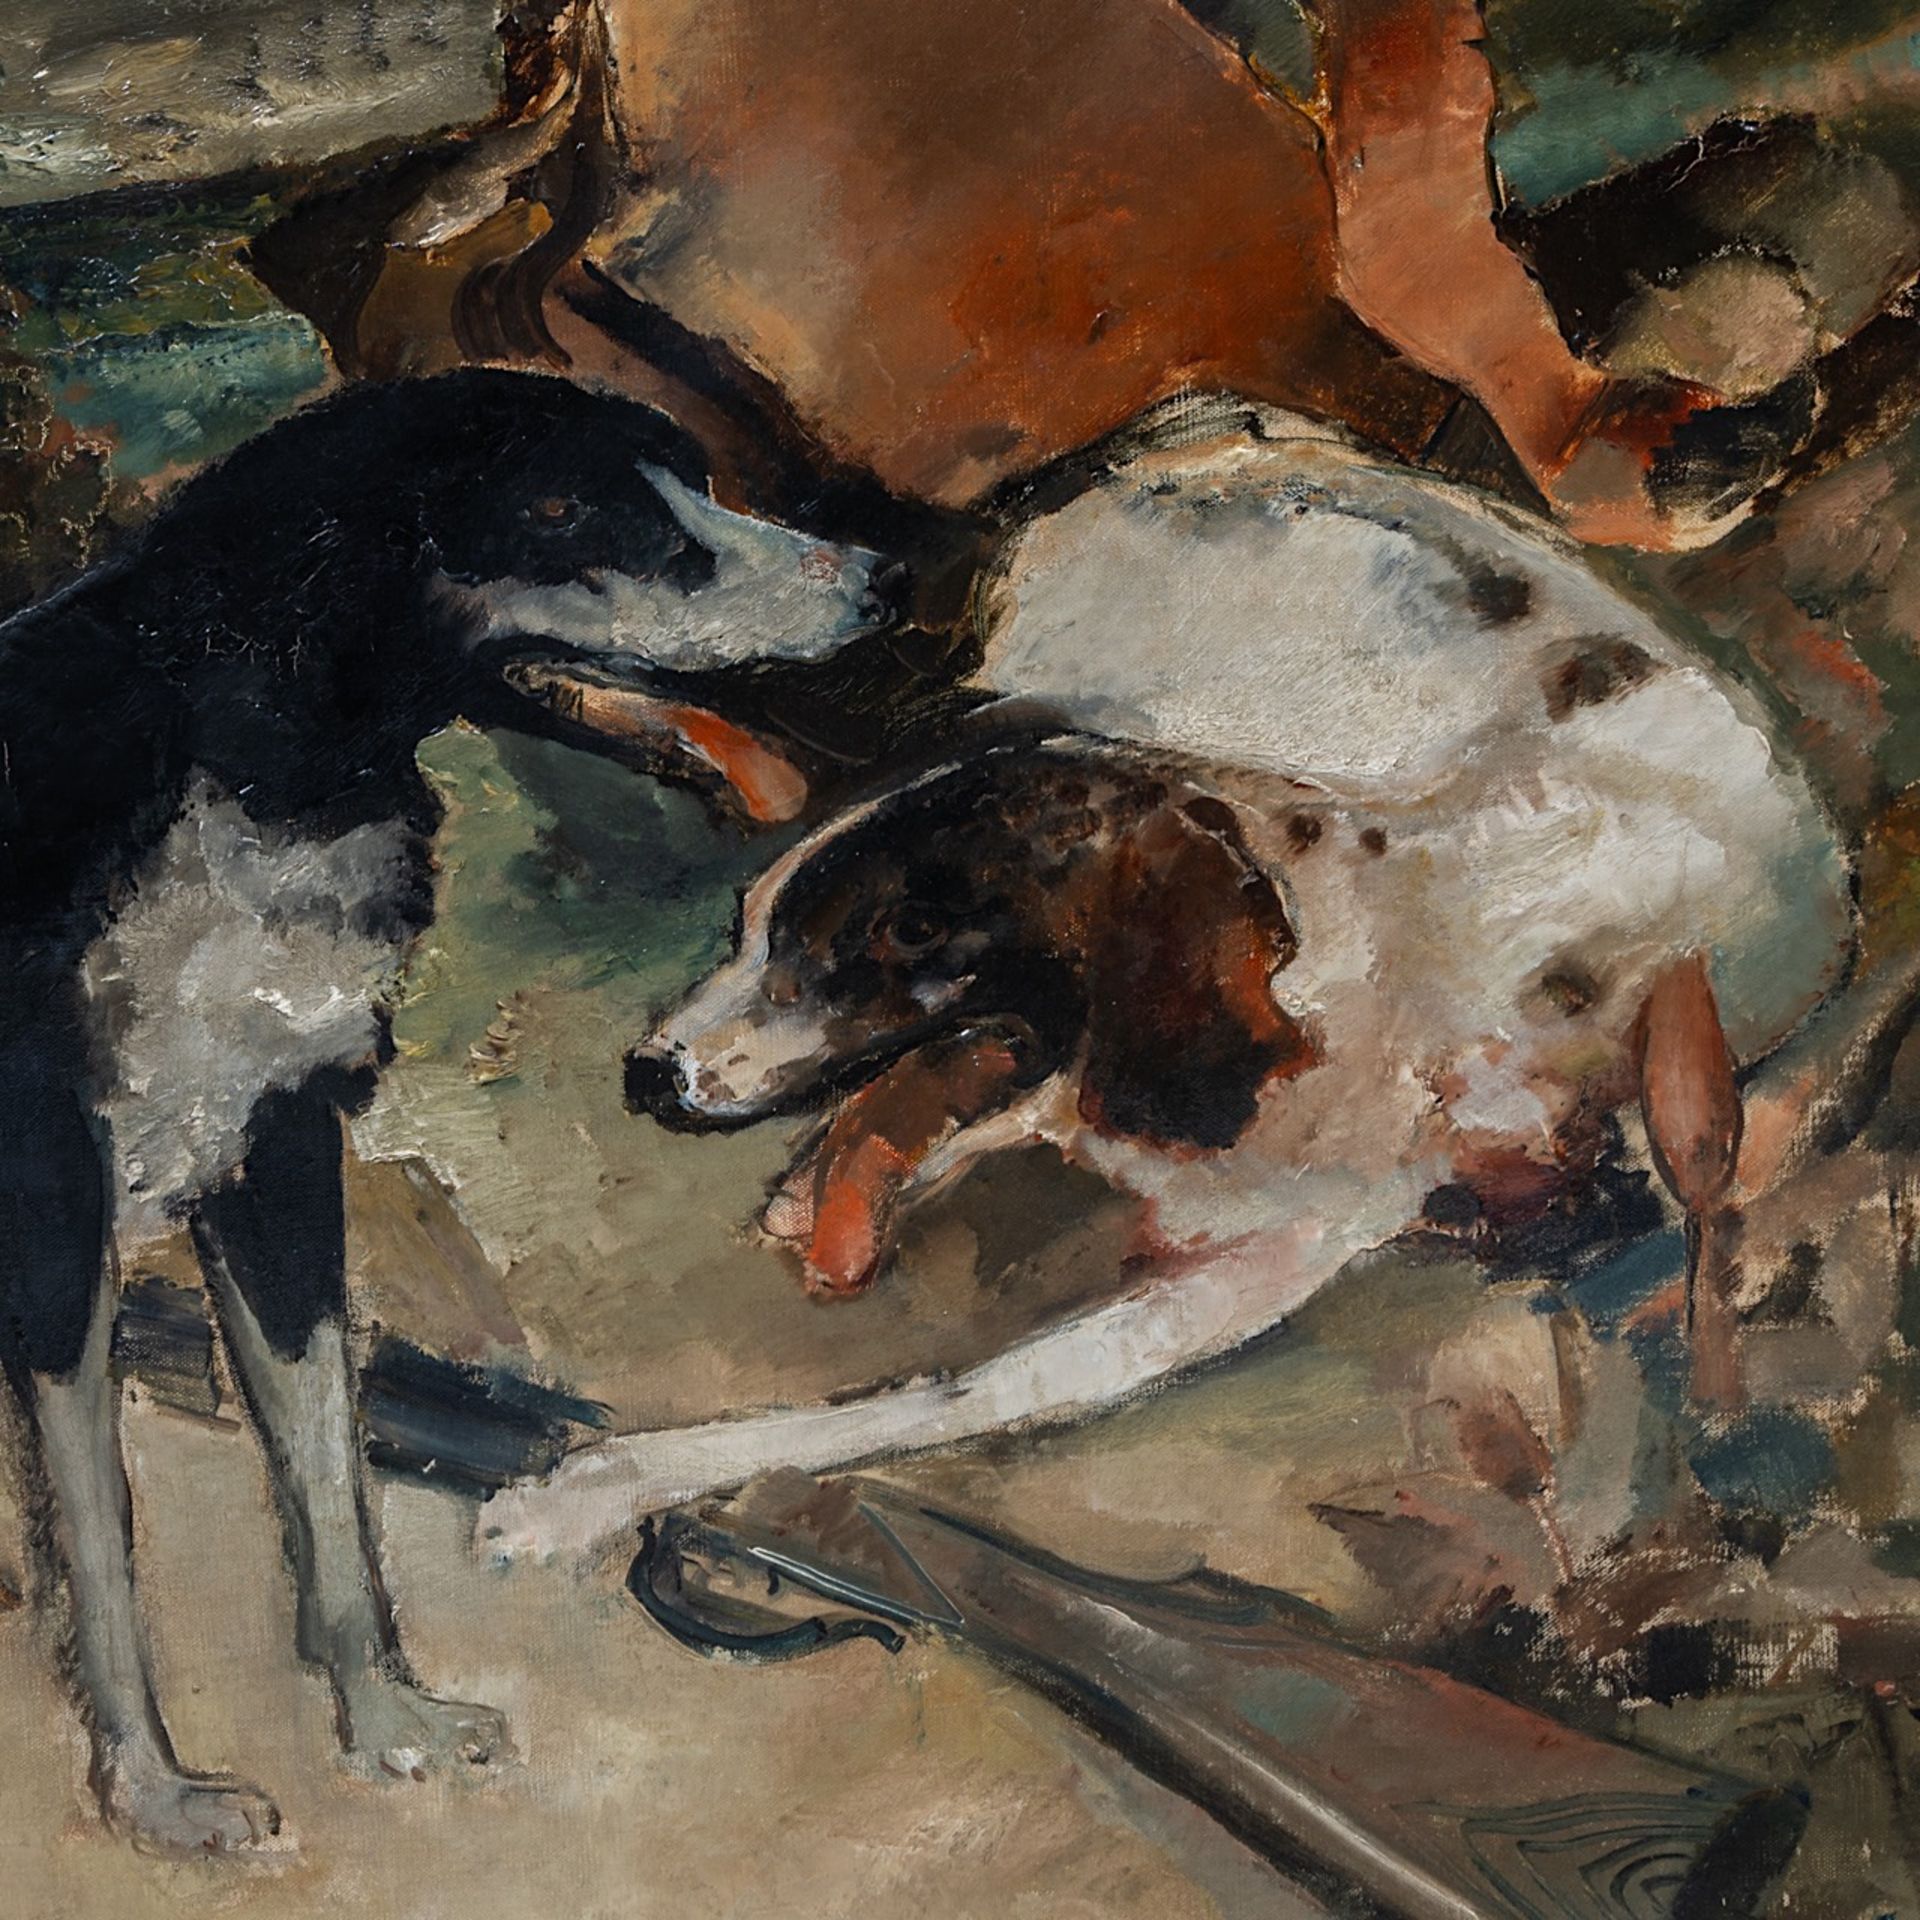 Albert Saverys (1886-1964), hunting dogs, oil canvas 100 x 110 cm. (39.3 x 43.3 in.), Frame: 116 x 1 - Image 6 of 6